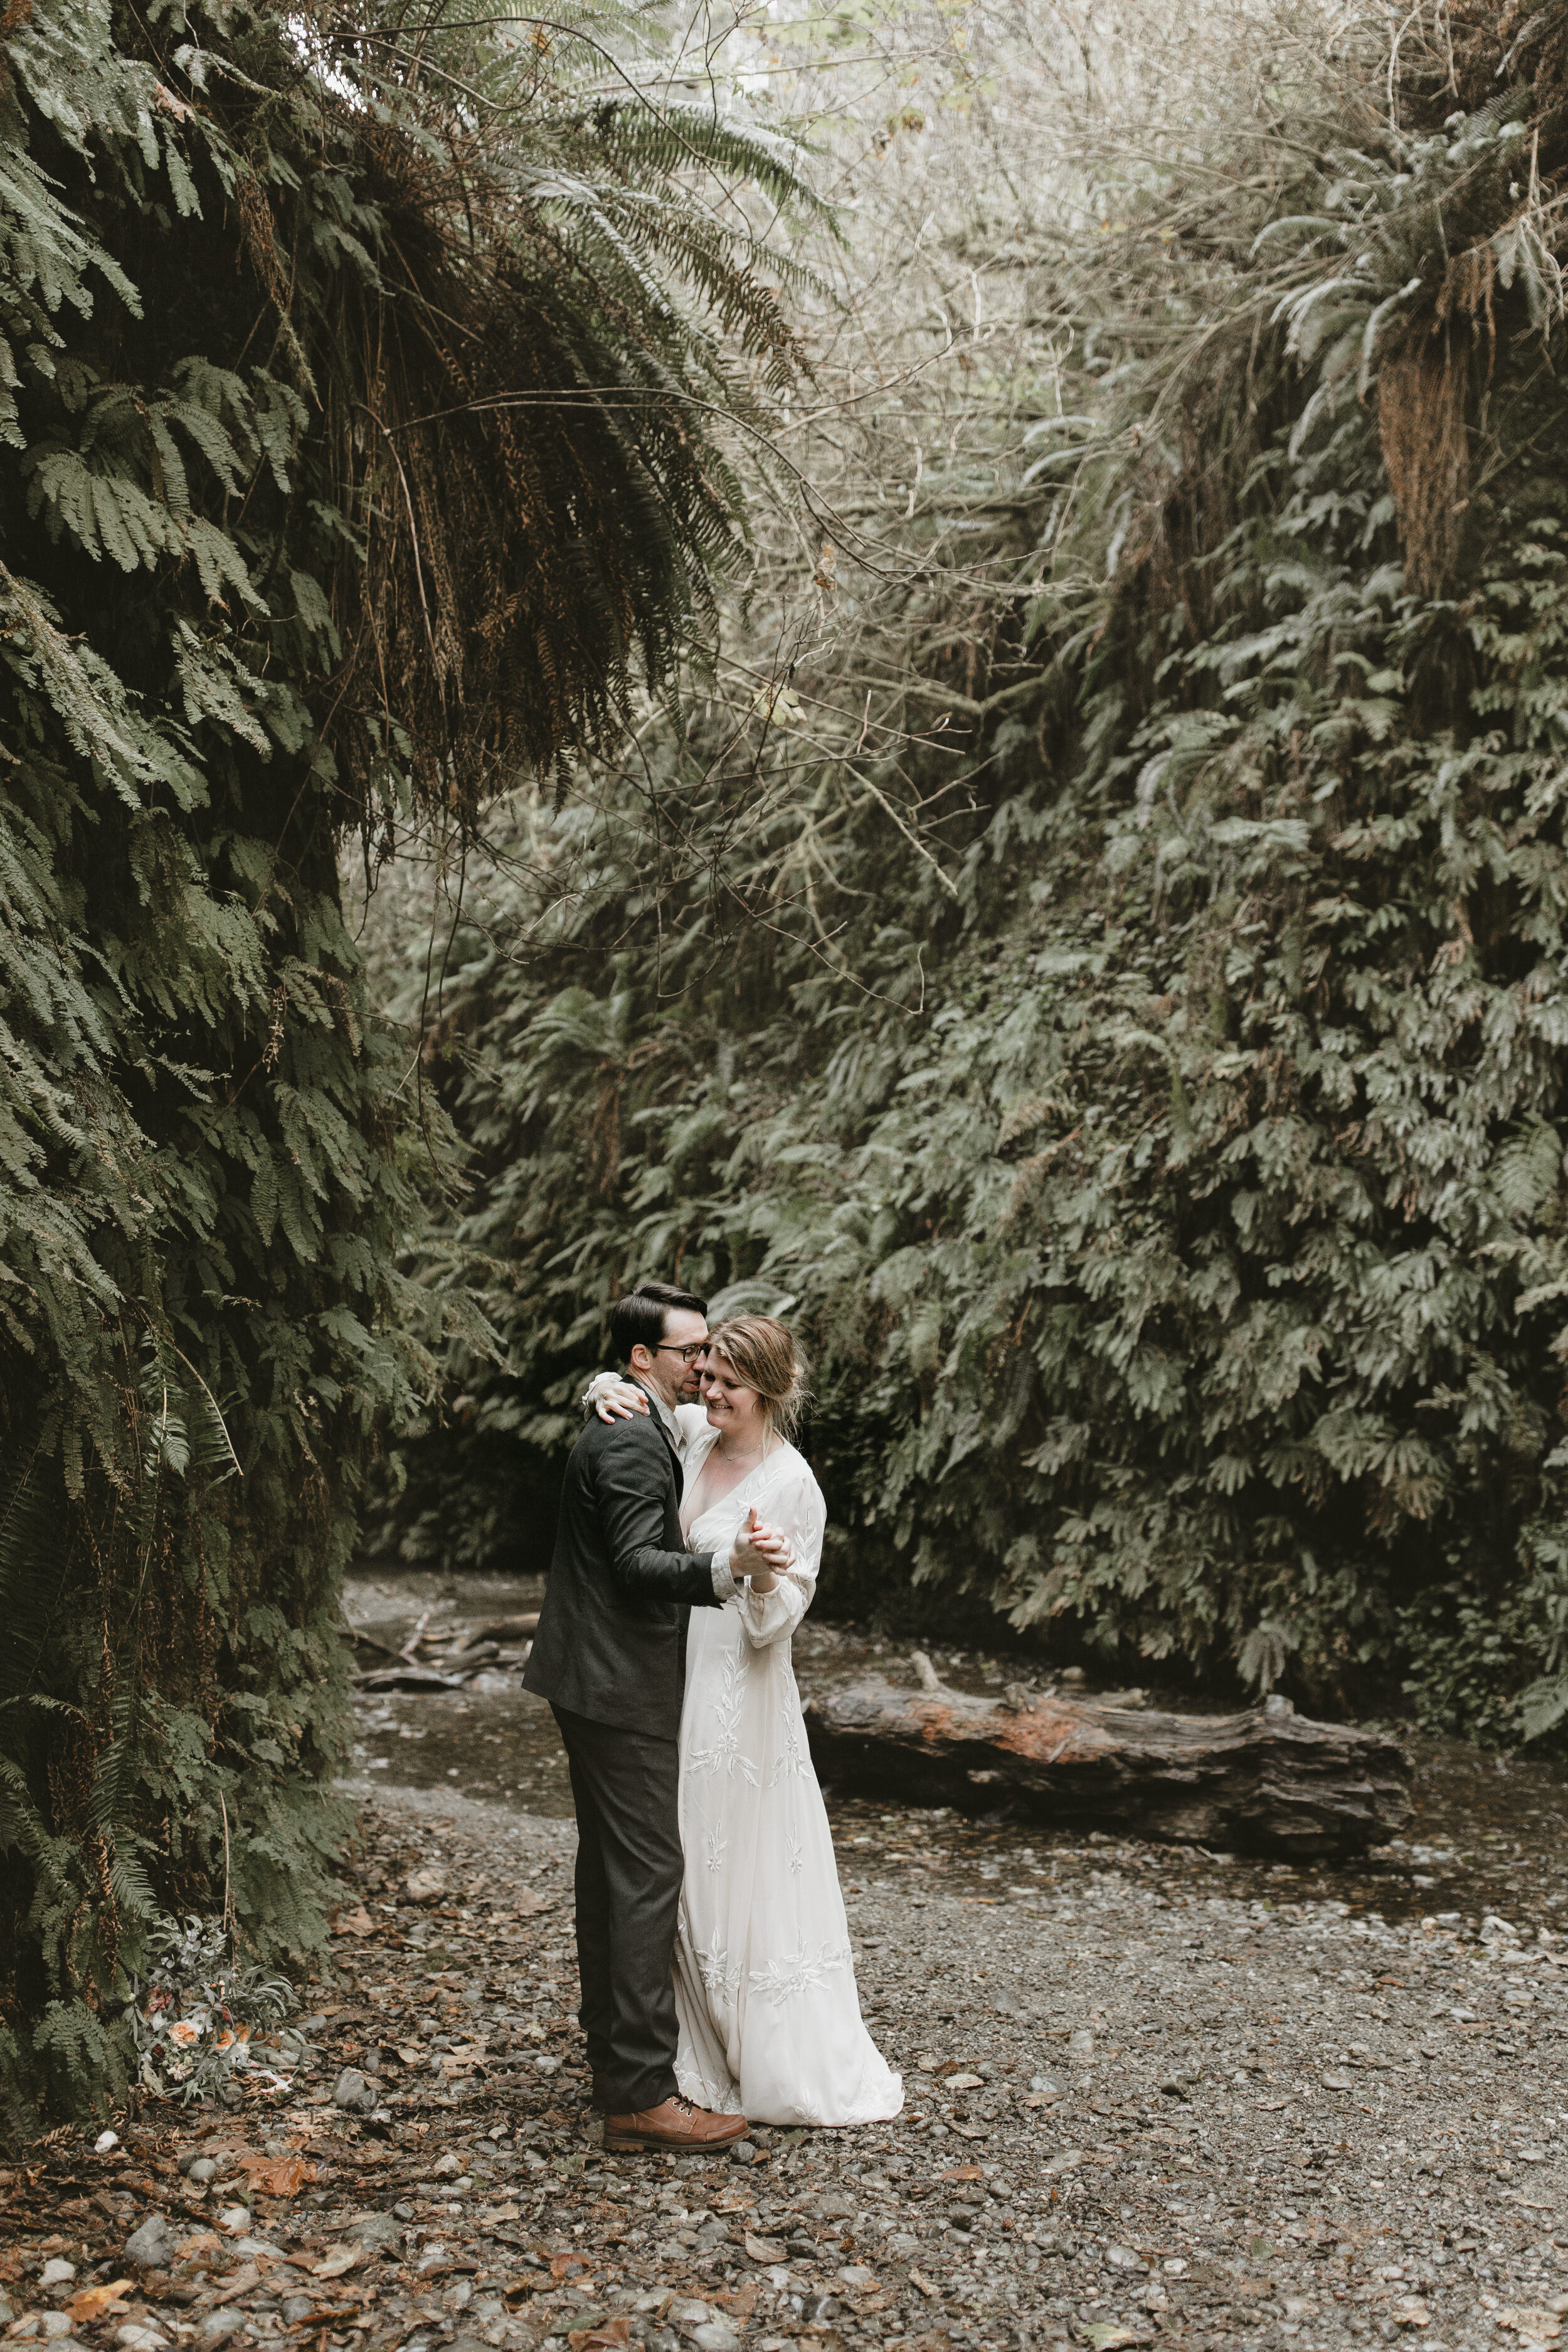 nicole-daacke-photography-redwood-forest-elopement-in-northern-california-patricks-point-coast-adventure-elopement-photography-redwoods-elopement-photographer-180.jpg